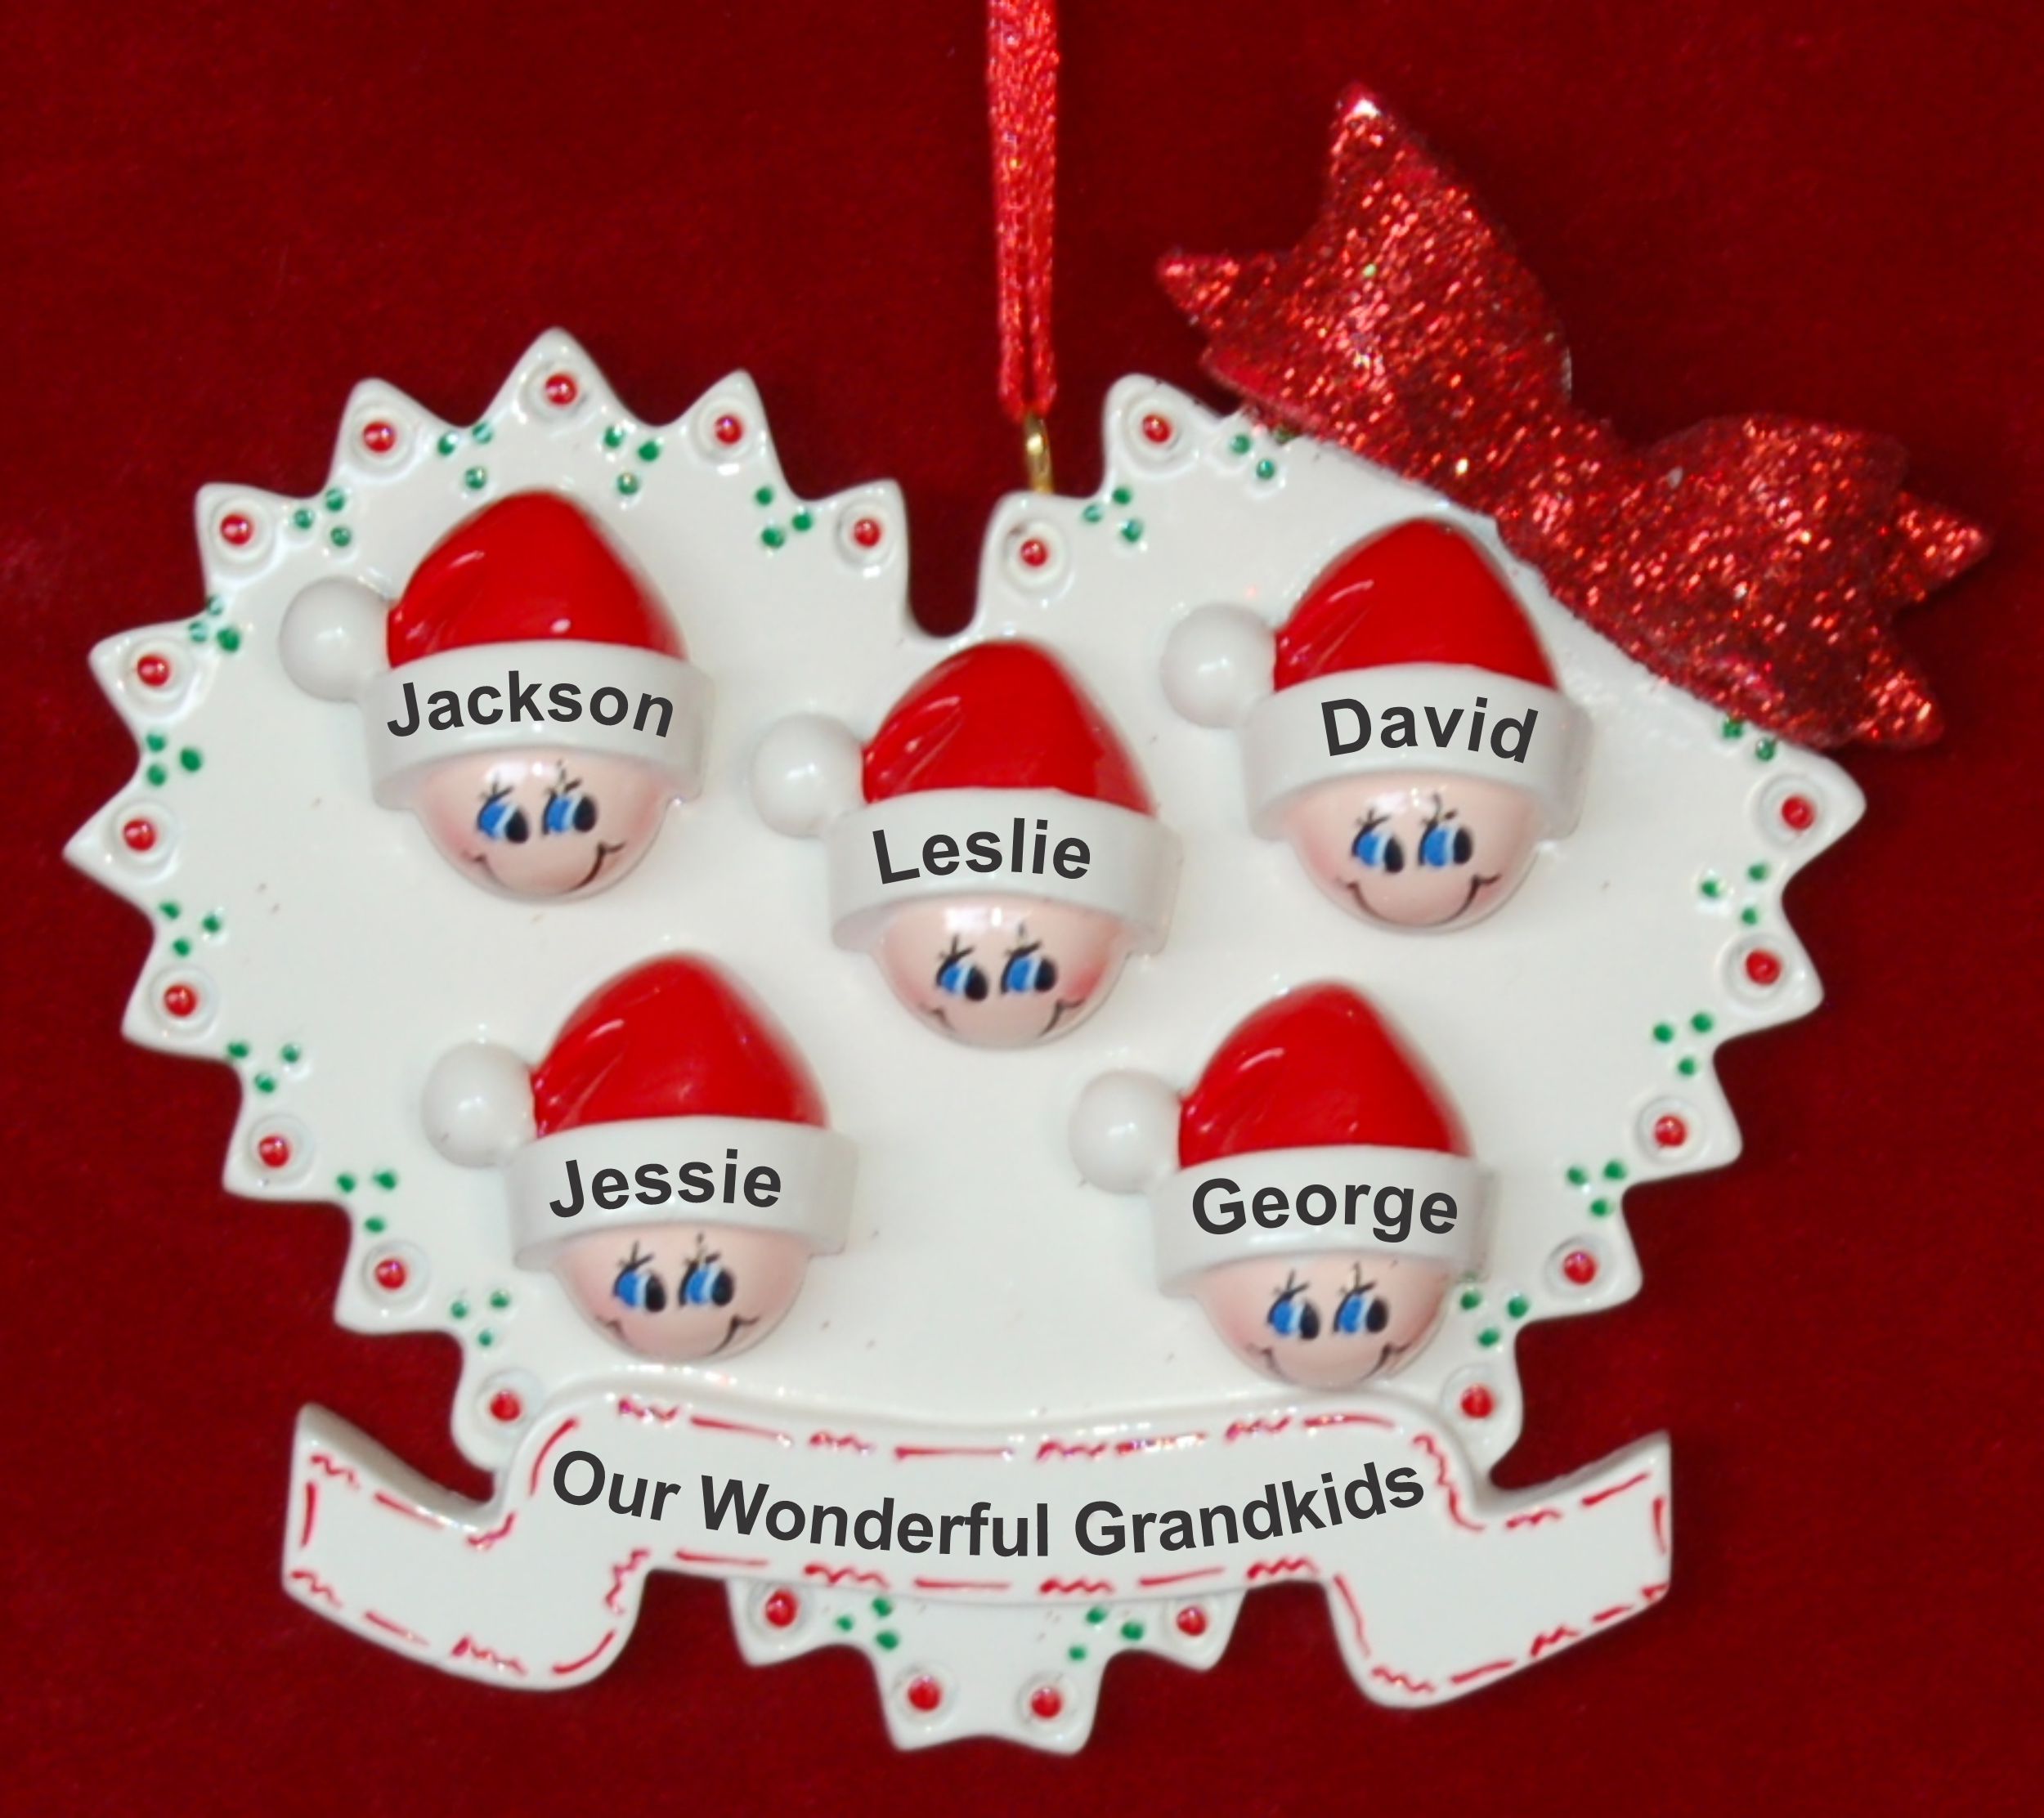 Personalized Grandparents Christmas Ornament Quilt of Love 5 Grandkids by Russell Rhodes